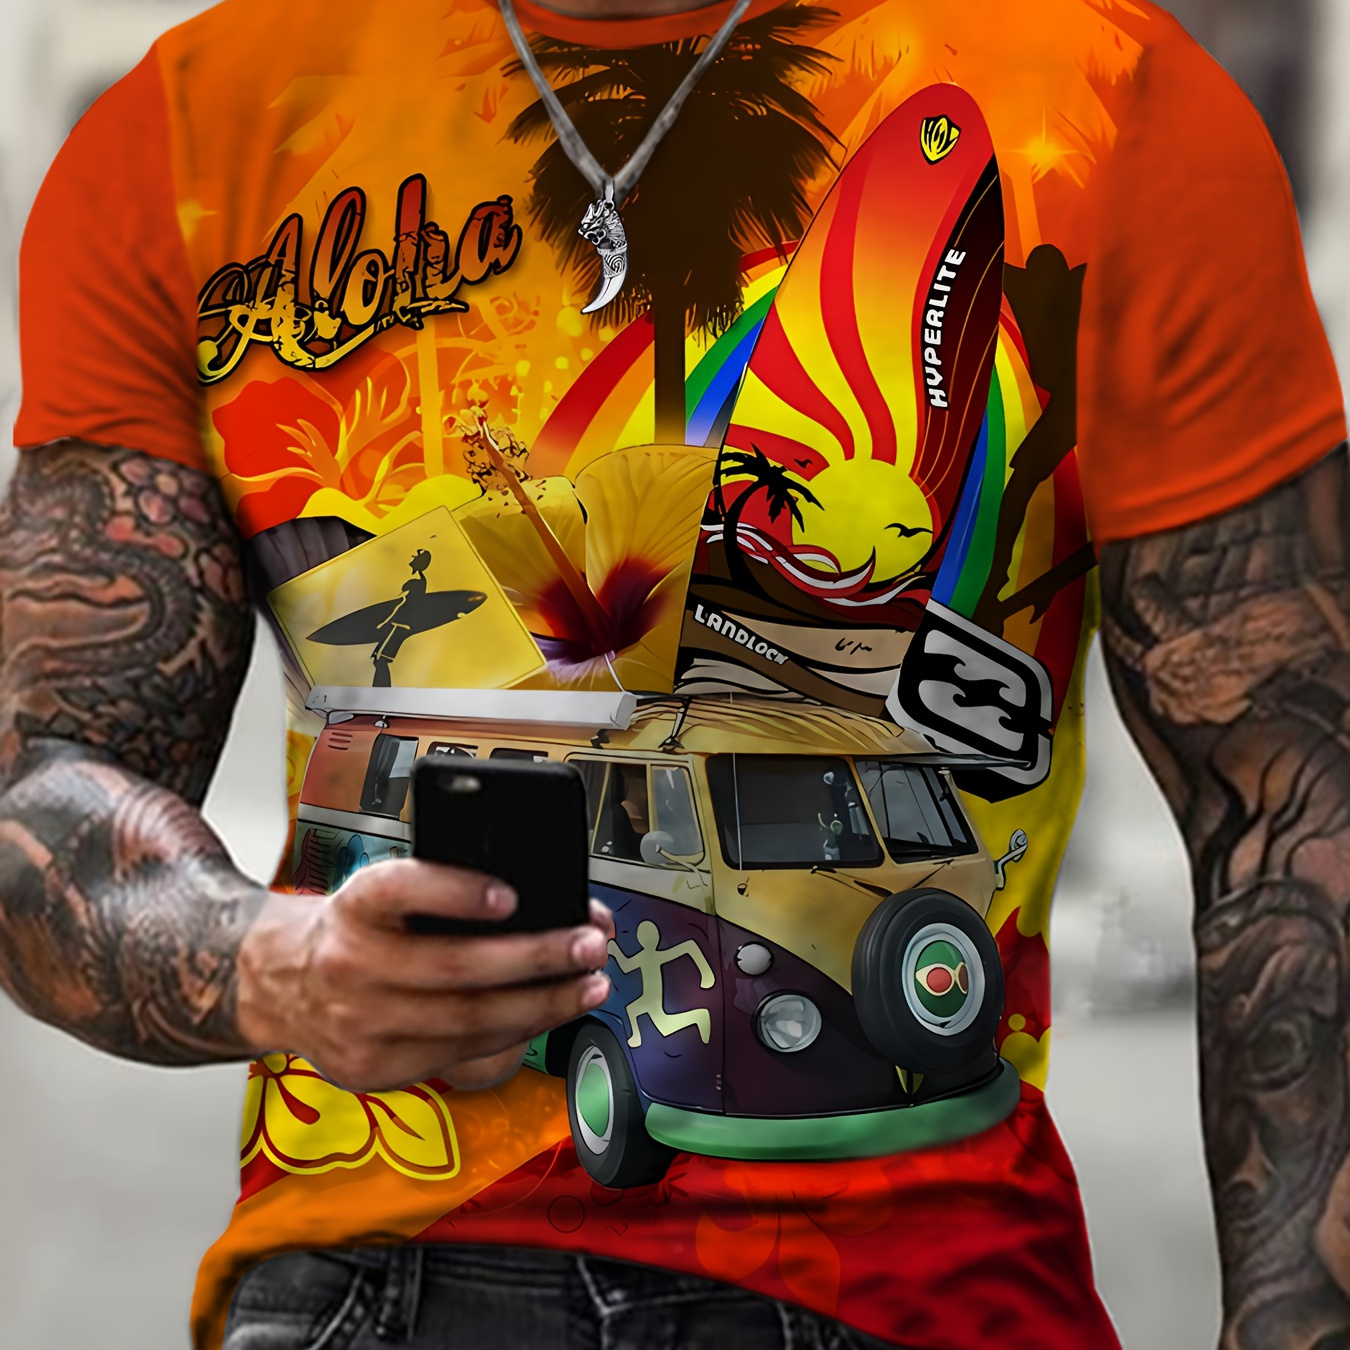 

Men's Vibrant Aloha Surf Van Graphic Plus Size T-shirt, Fashionable Casual Travel-inspired Tee, Colorful Summer Top